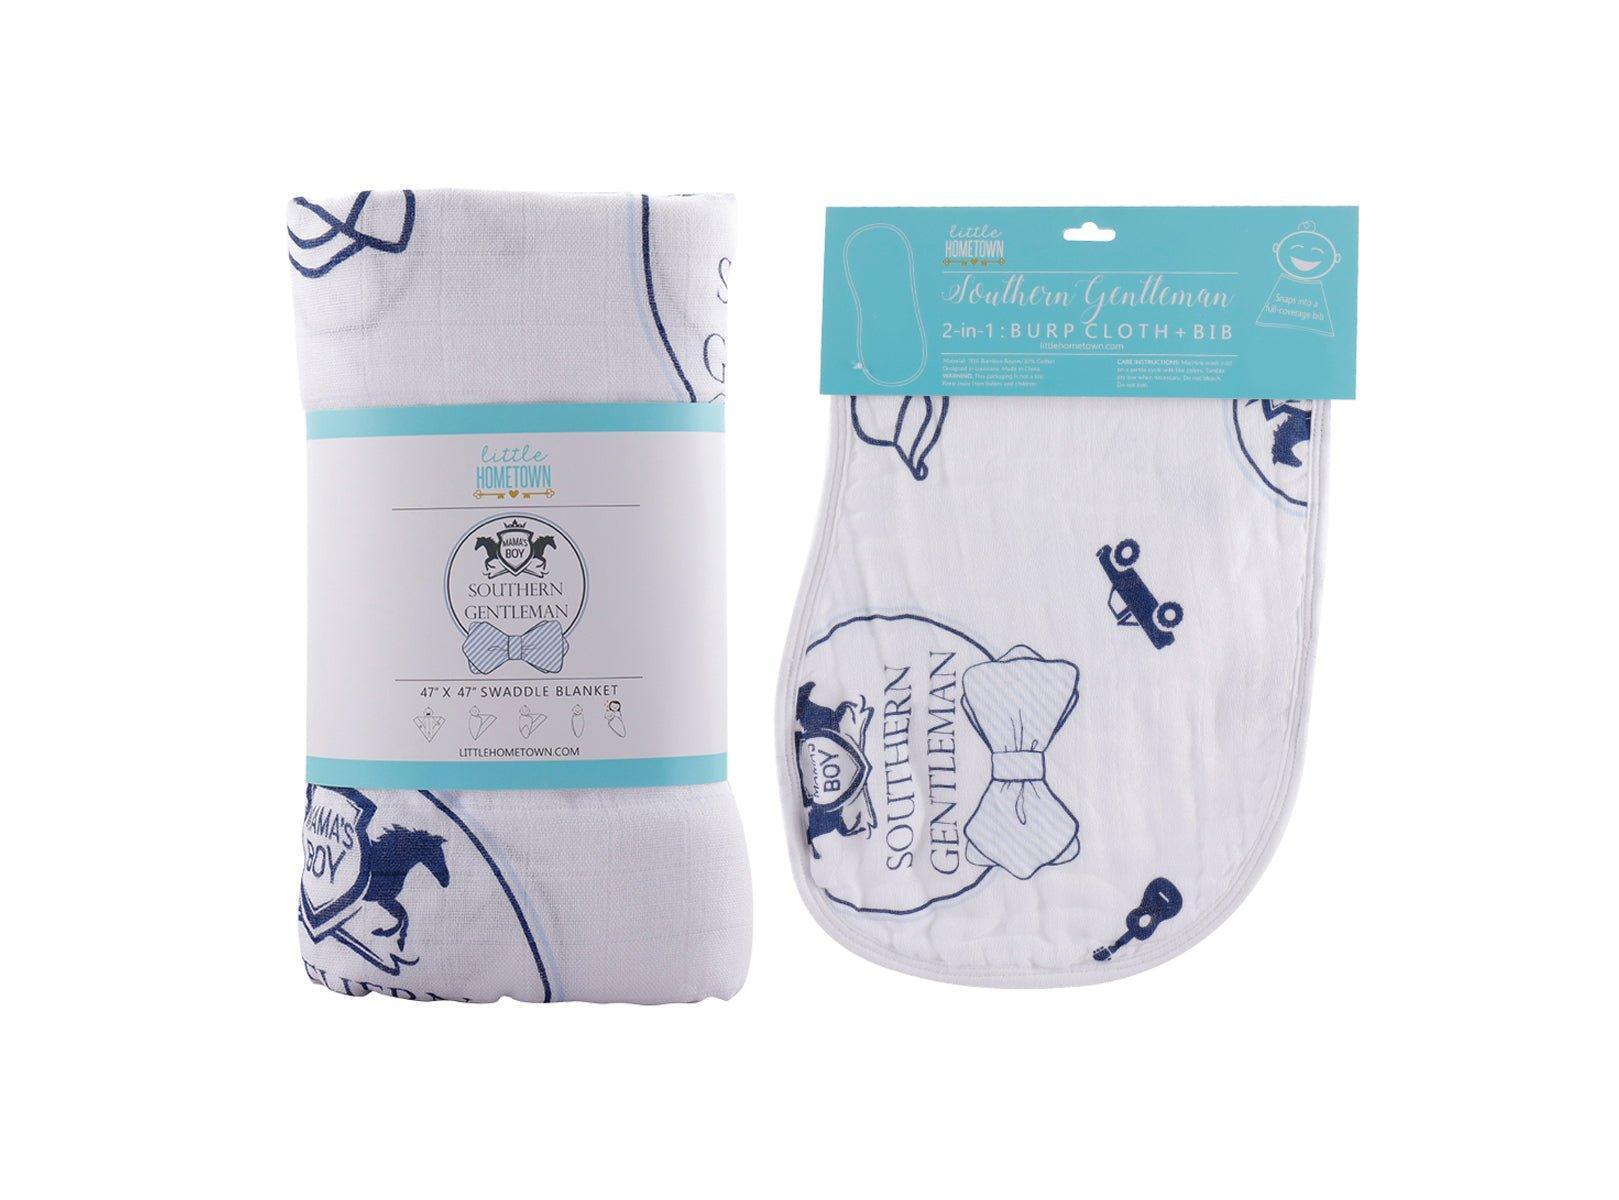 Southern Gentleman baby gift set with muslin swaddle blanket and burp cloth/bib combo, featuring a charming bowtie pattern.